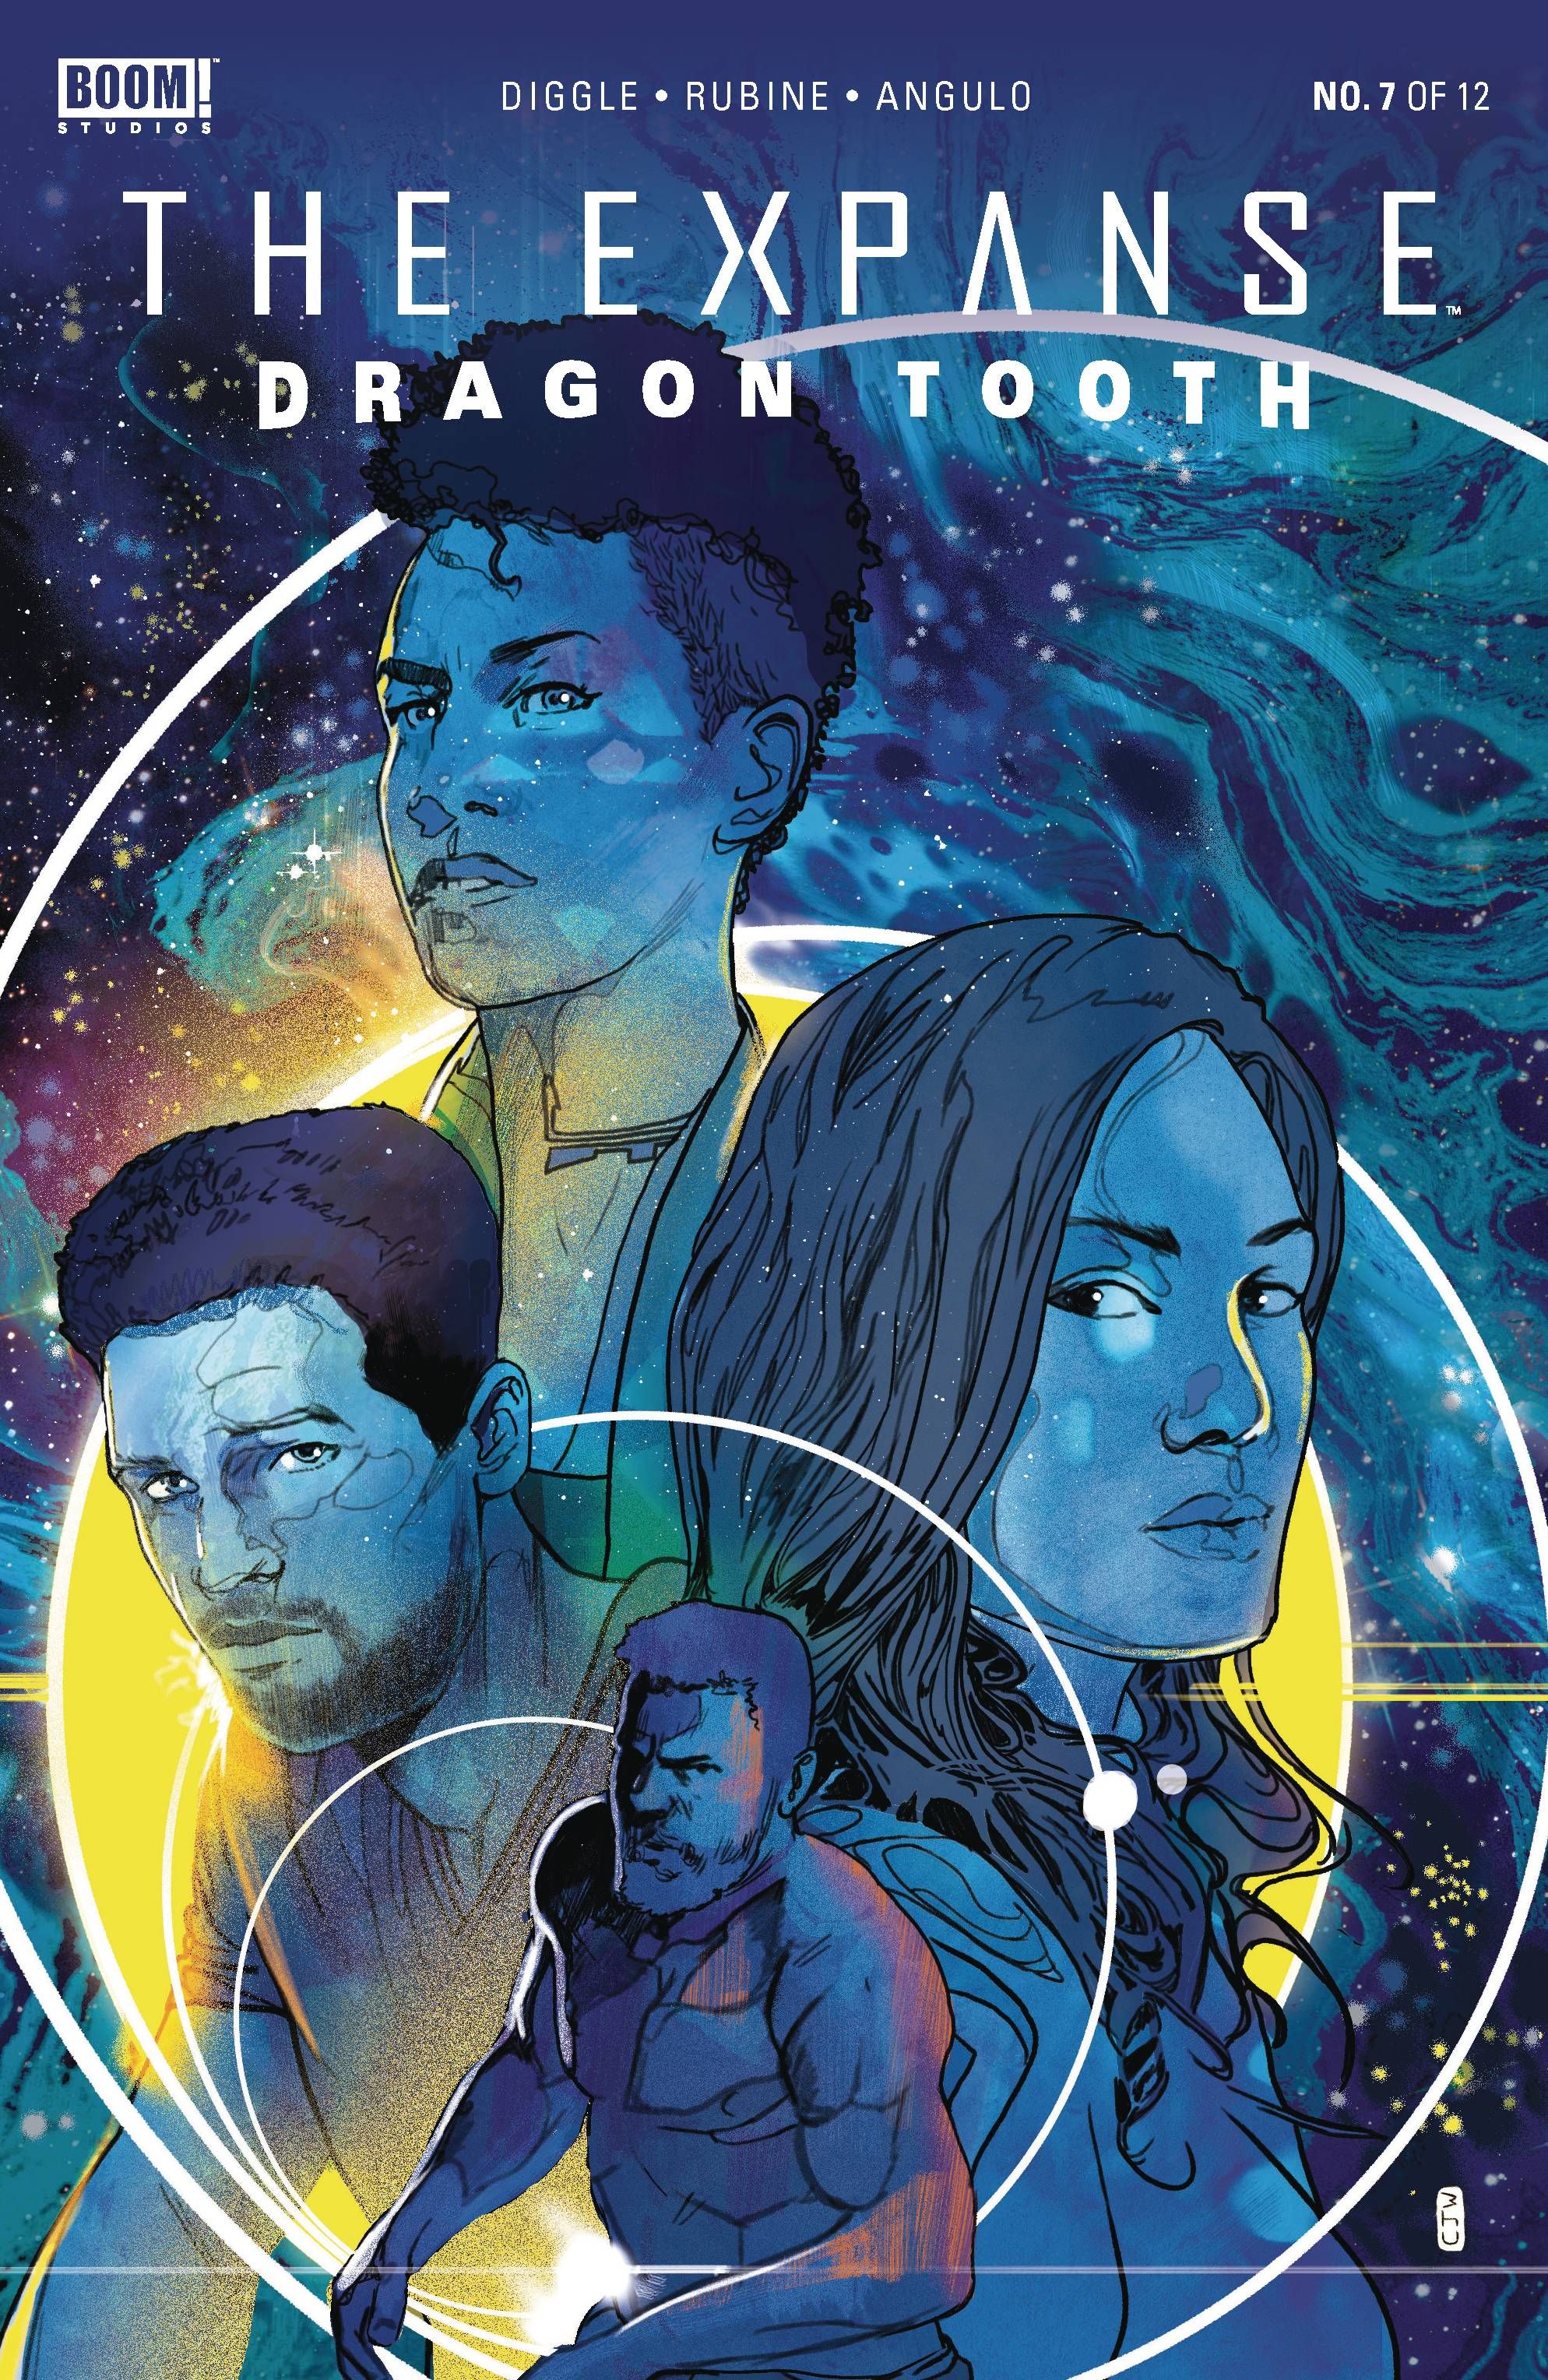 The Expanse: Dragon Tooth #7 Comic